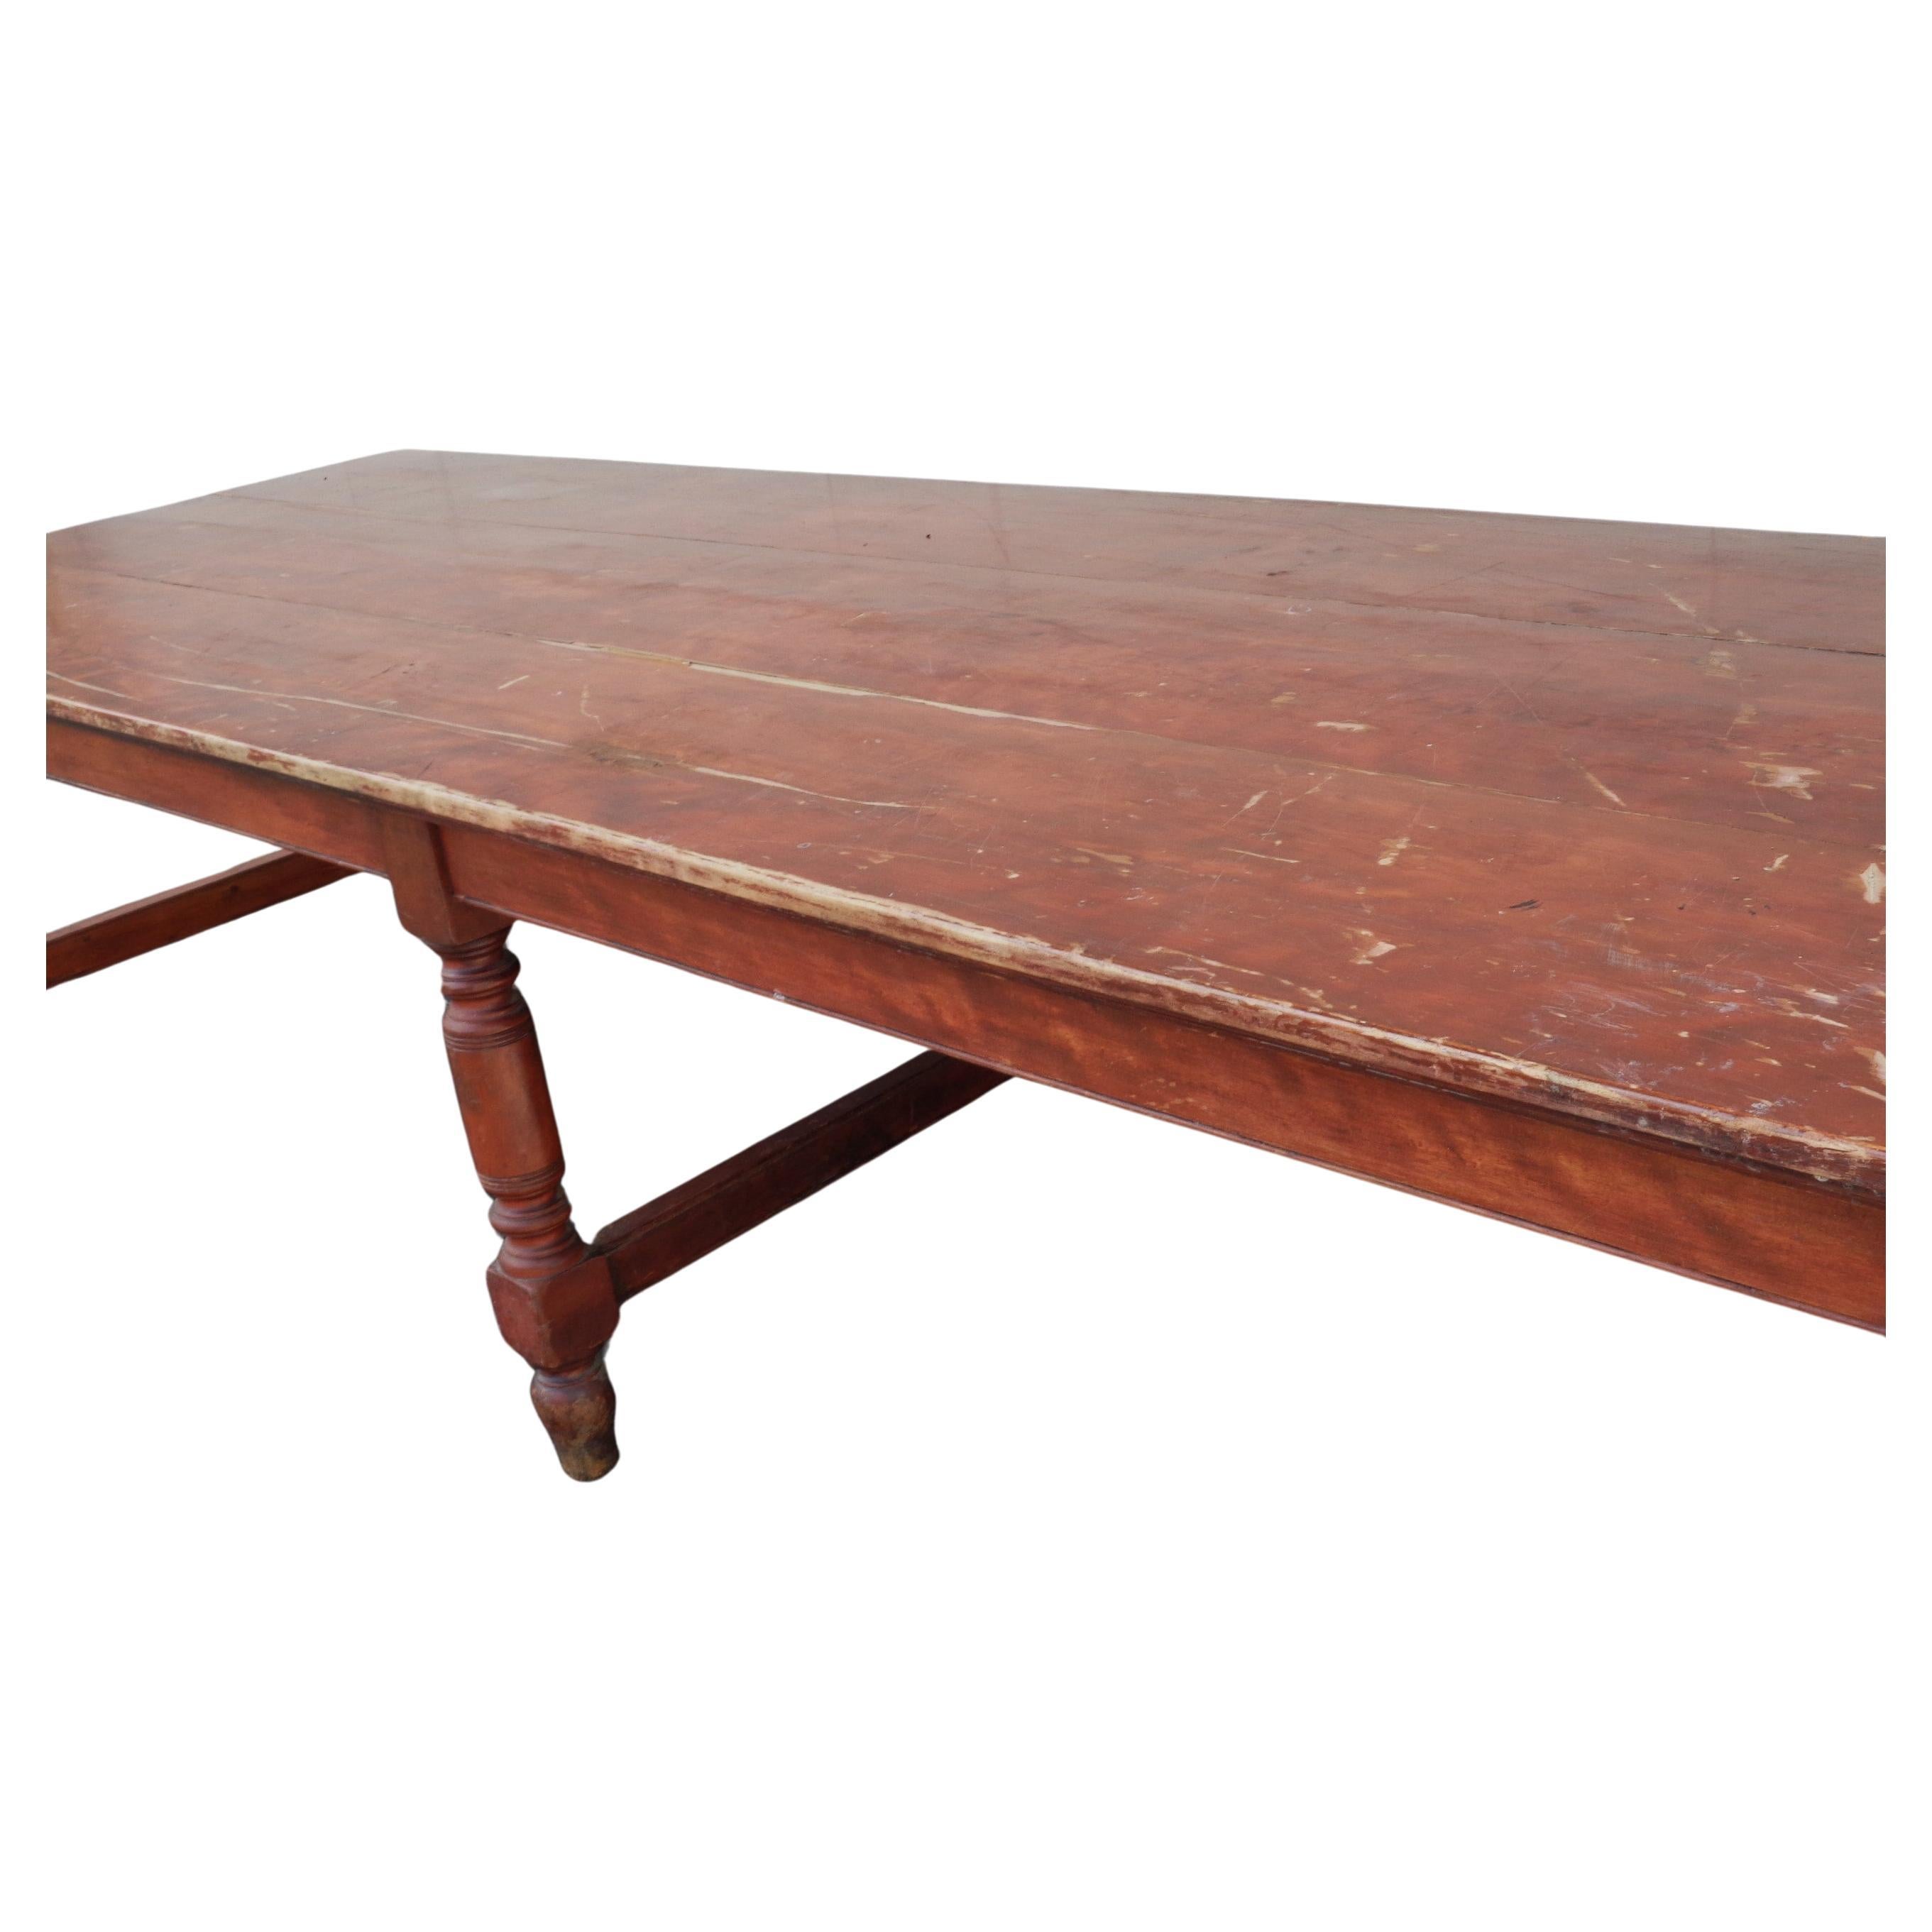 Antique American Banquet Dining Table, 1870-1880 For Sale 5